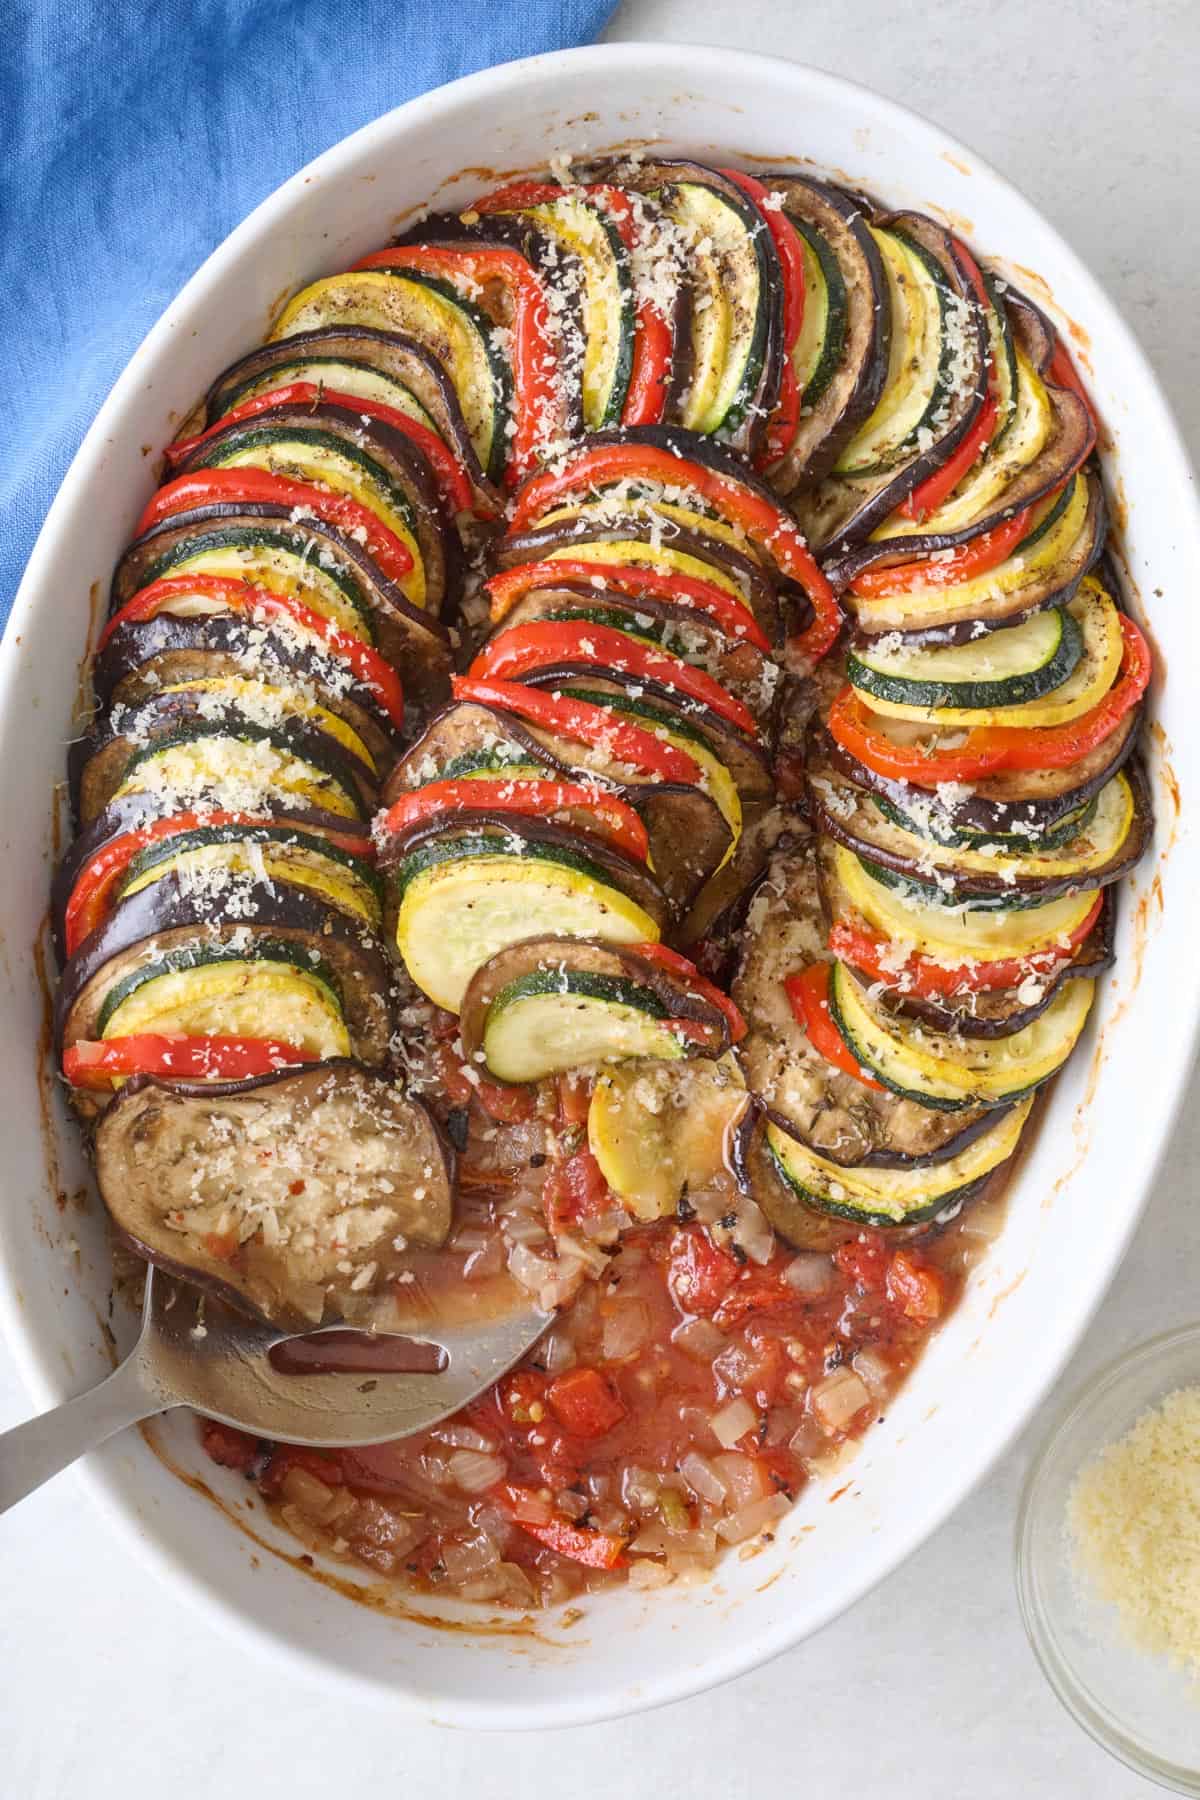 Baking dish of ratatouille with serving removed to show tomato sauce mixture on the bottom of pan.